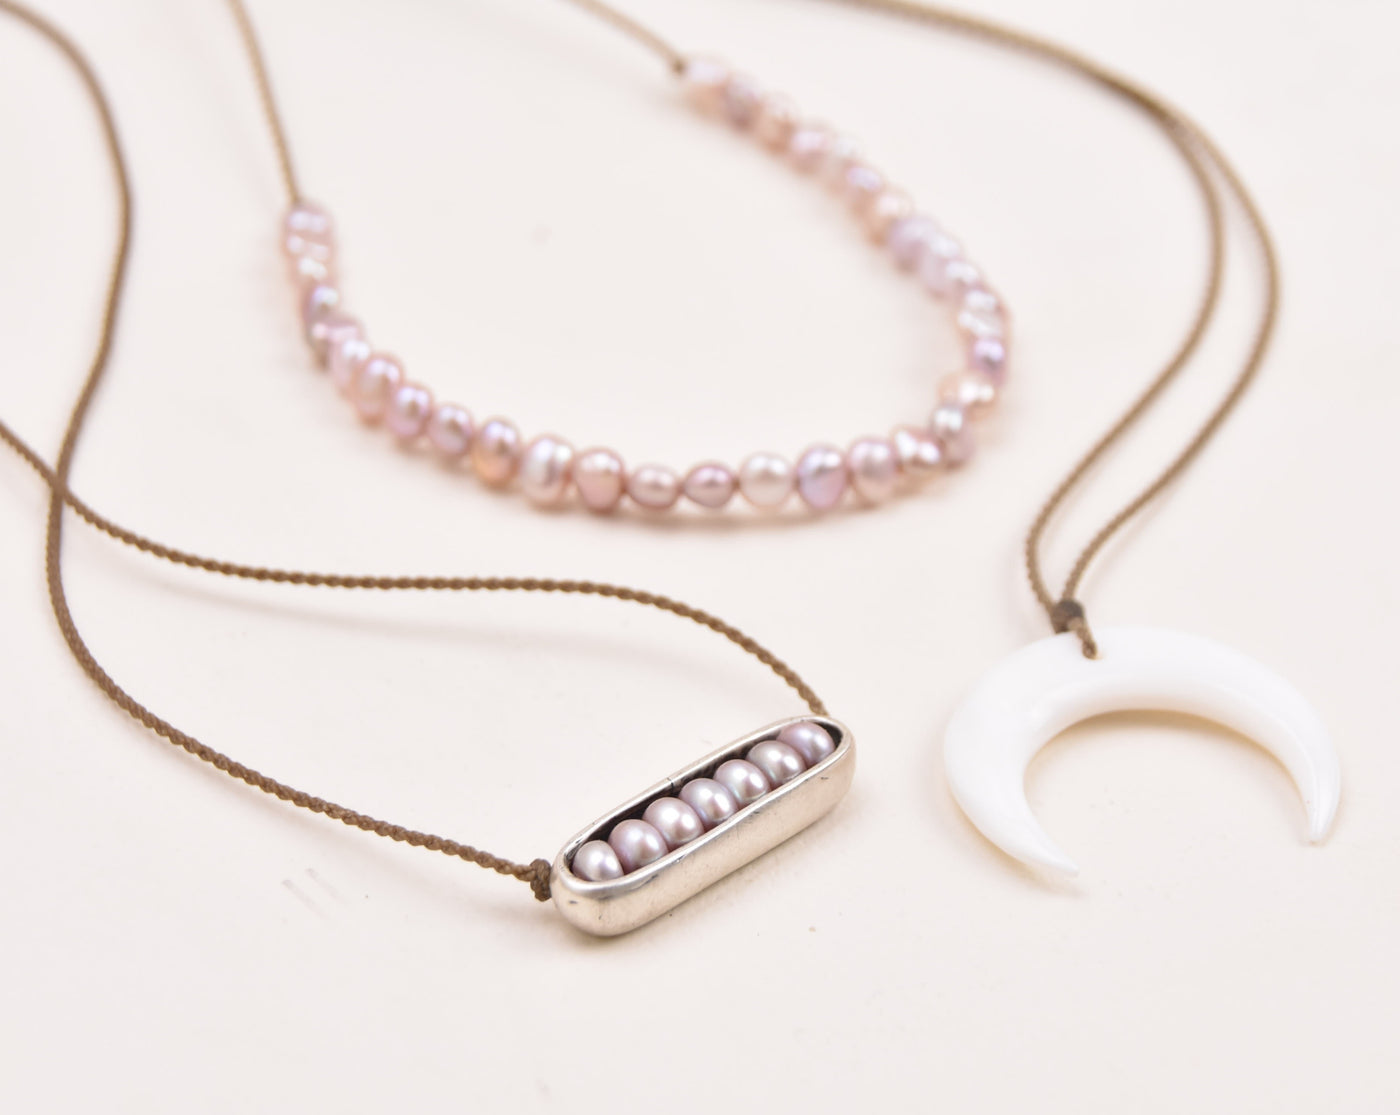 Girl Crush - Necklace Stack (15% off)